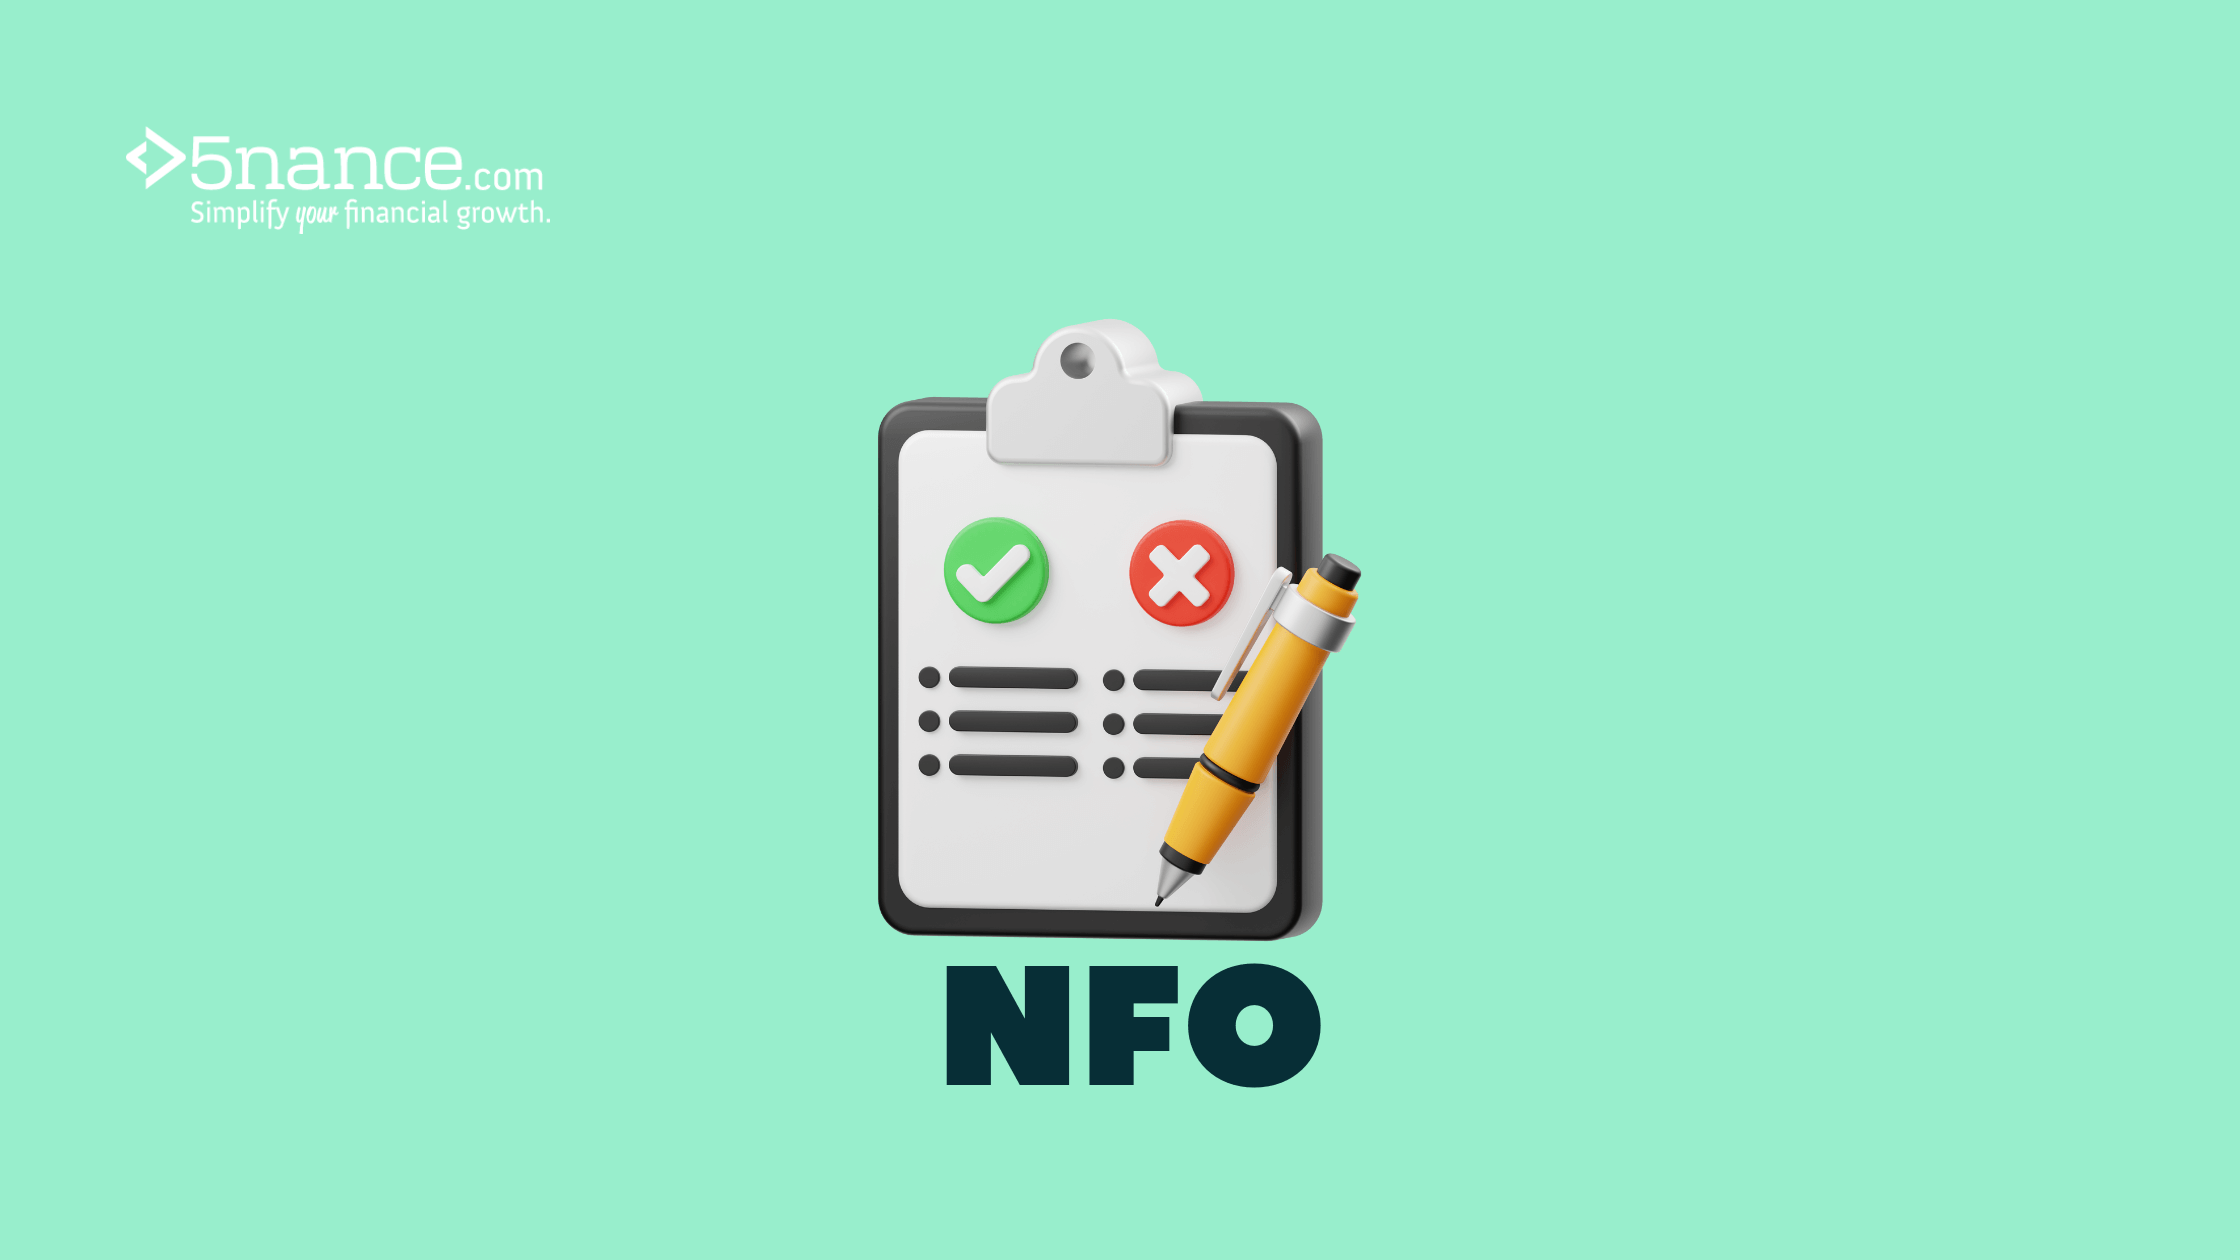 The pro's and cons of investing in NFO (New Fund Offering)